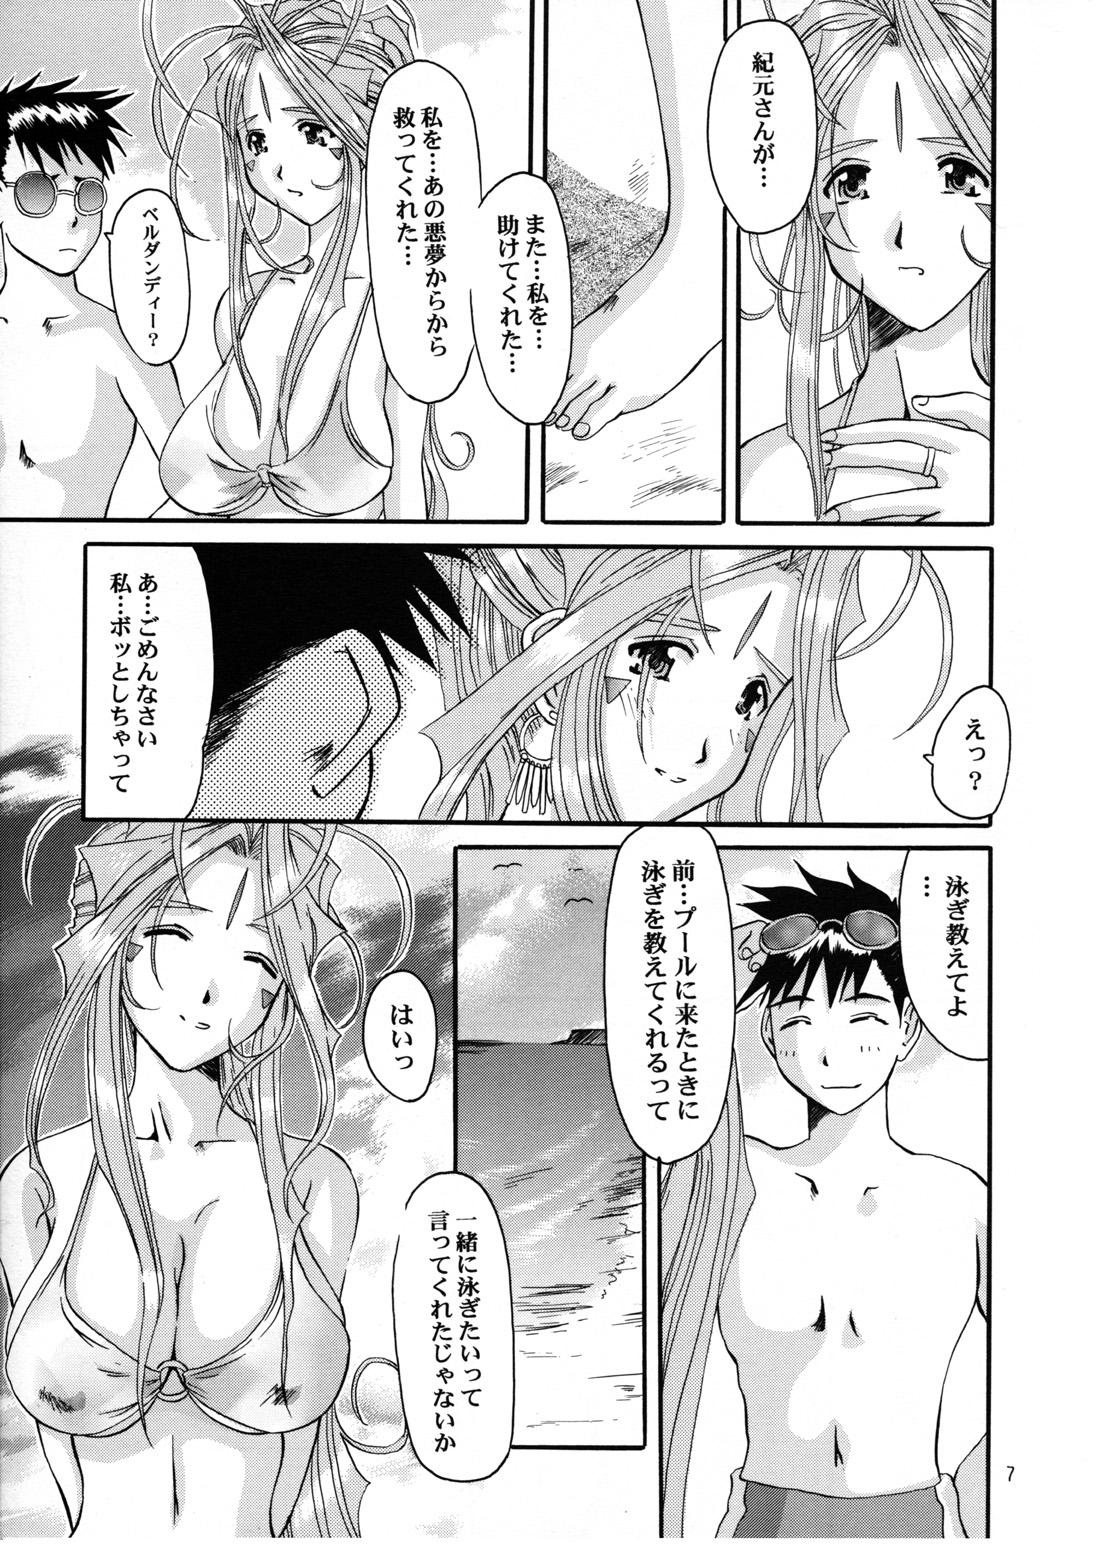 With Nightmare of My Goddess Summer Interval - Ah my goddess Gay Blowjob - Page 7